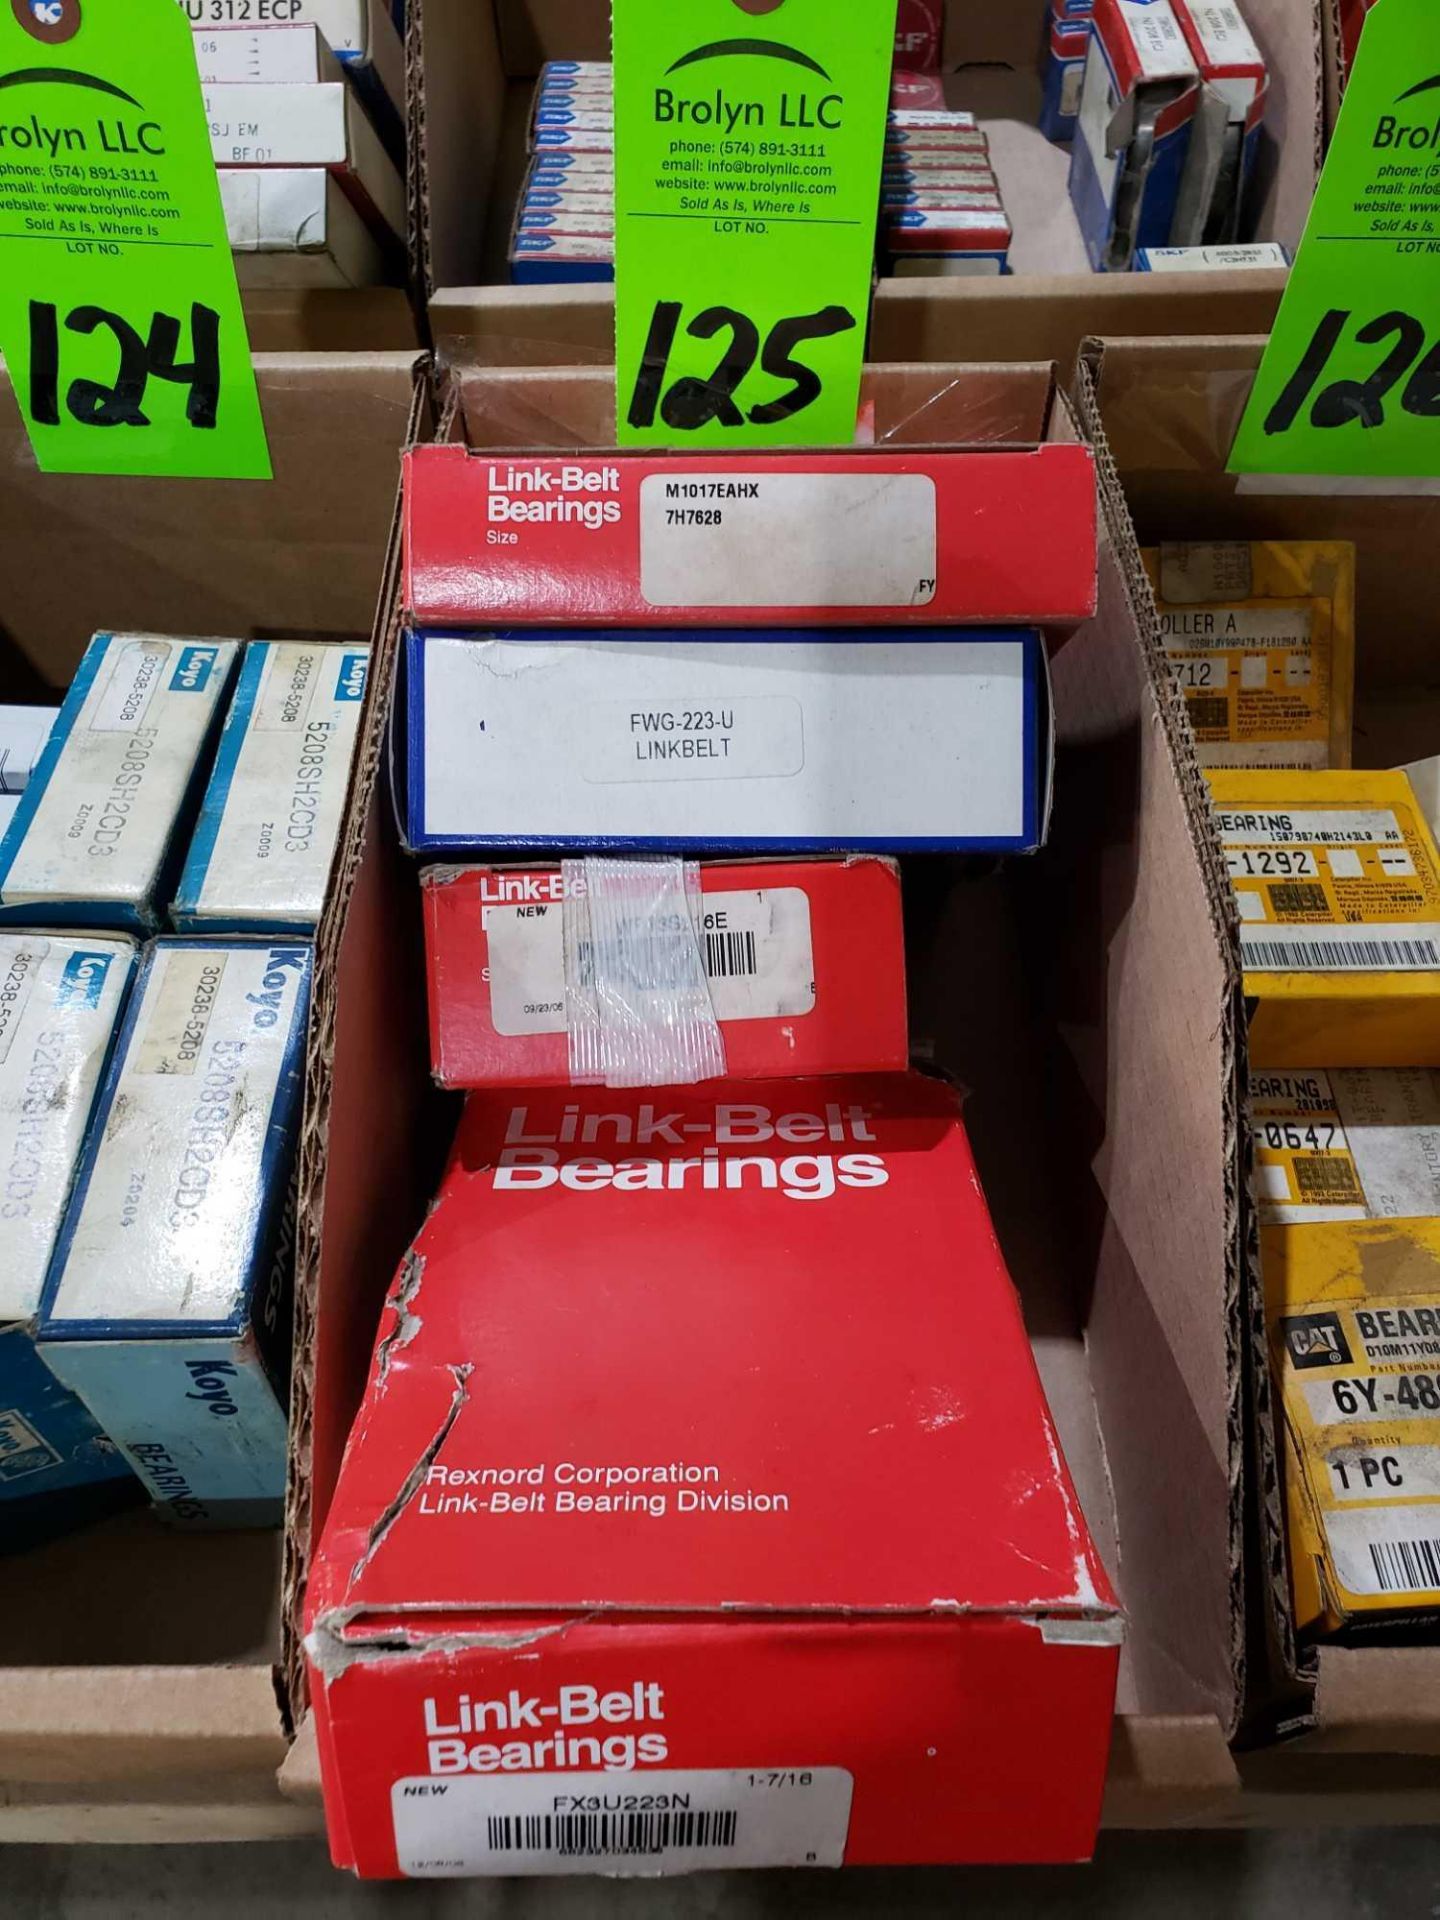 Qty 4- Link-Belt bearings, assorted part numbers. New in boxes as pictured.